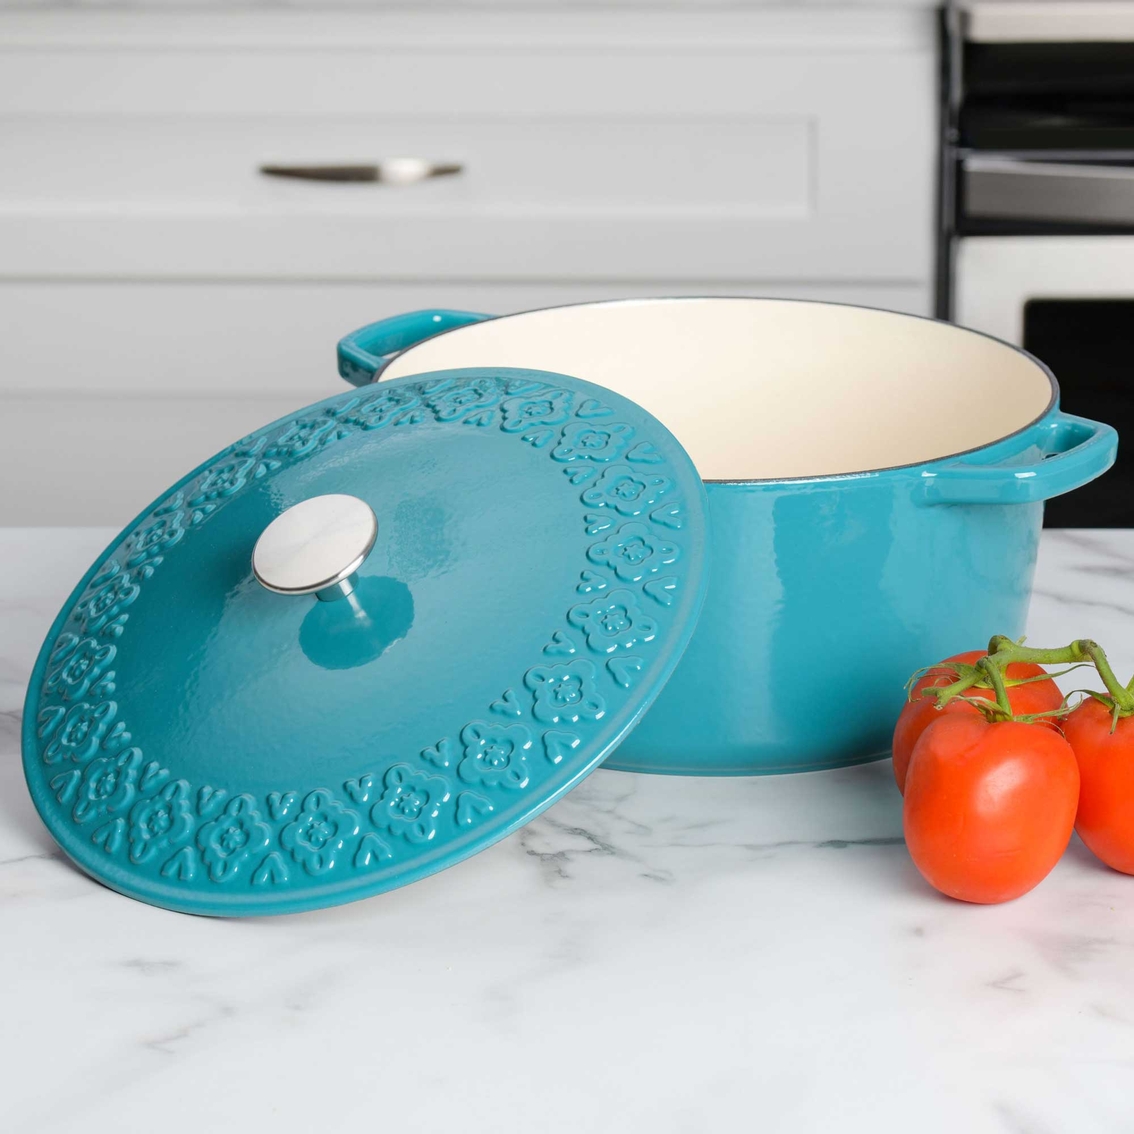 Spice By Tia Mowry 6 Qt. Dutch Oven With Embossed Lid | Cookware ...